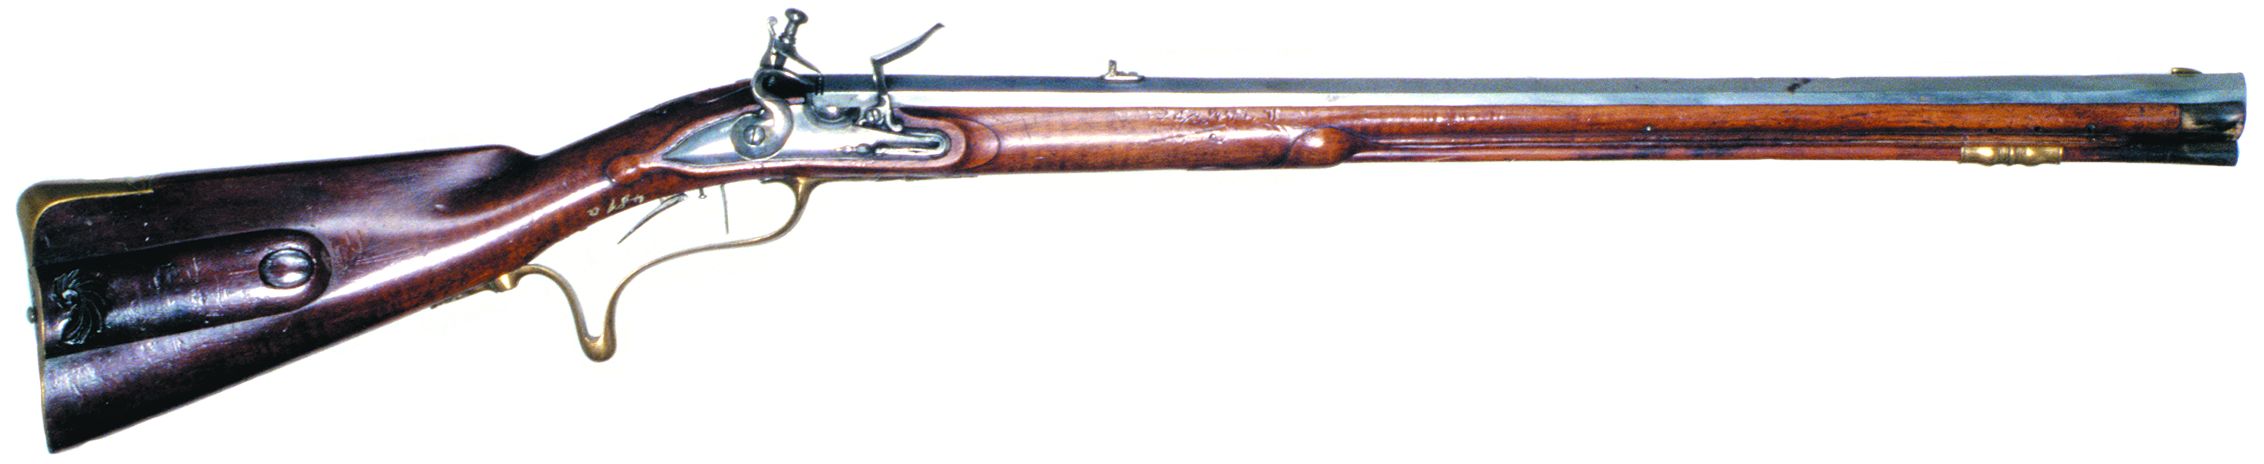 This Hessian Jäger rifle was made by Bernard Pistor in Cassel in 1769.